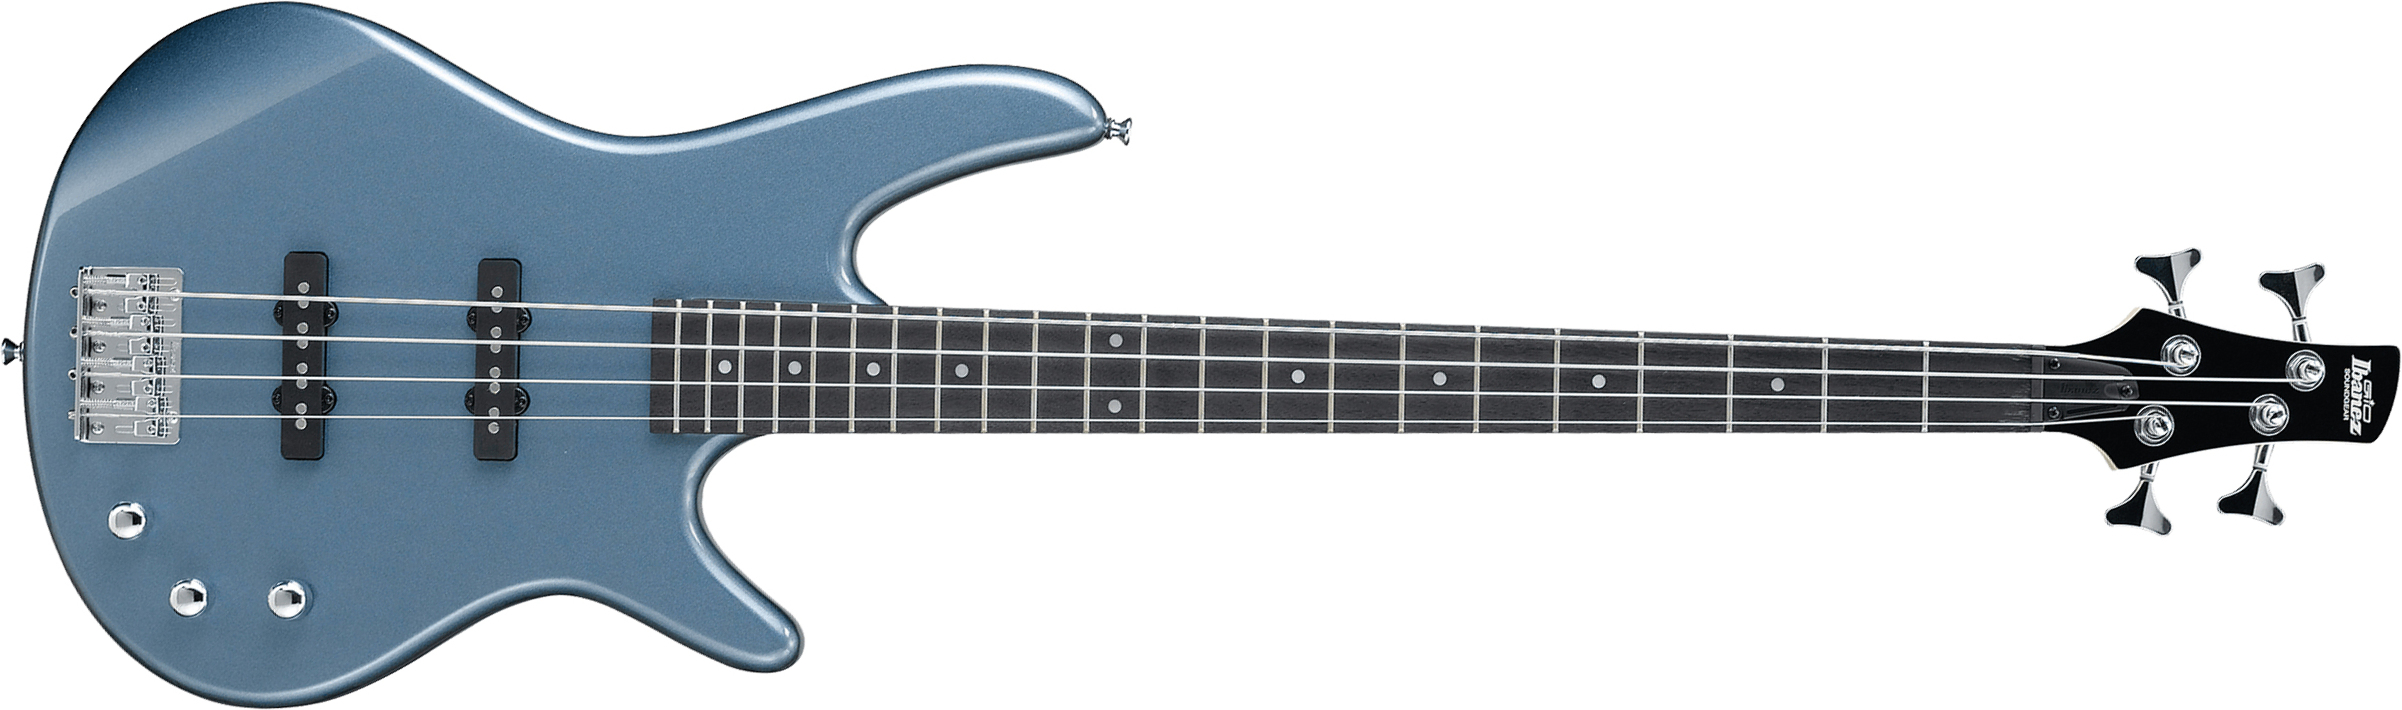 Ibanez Gsr180 Bem Gio Pur - Baltic Blue Metallic - Solid body electric bass - Main picture